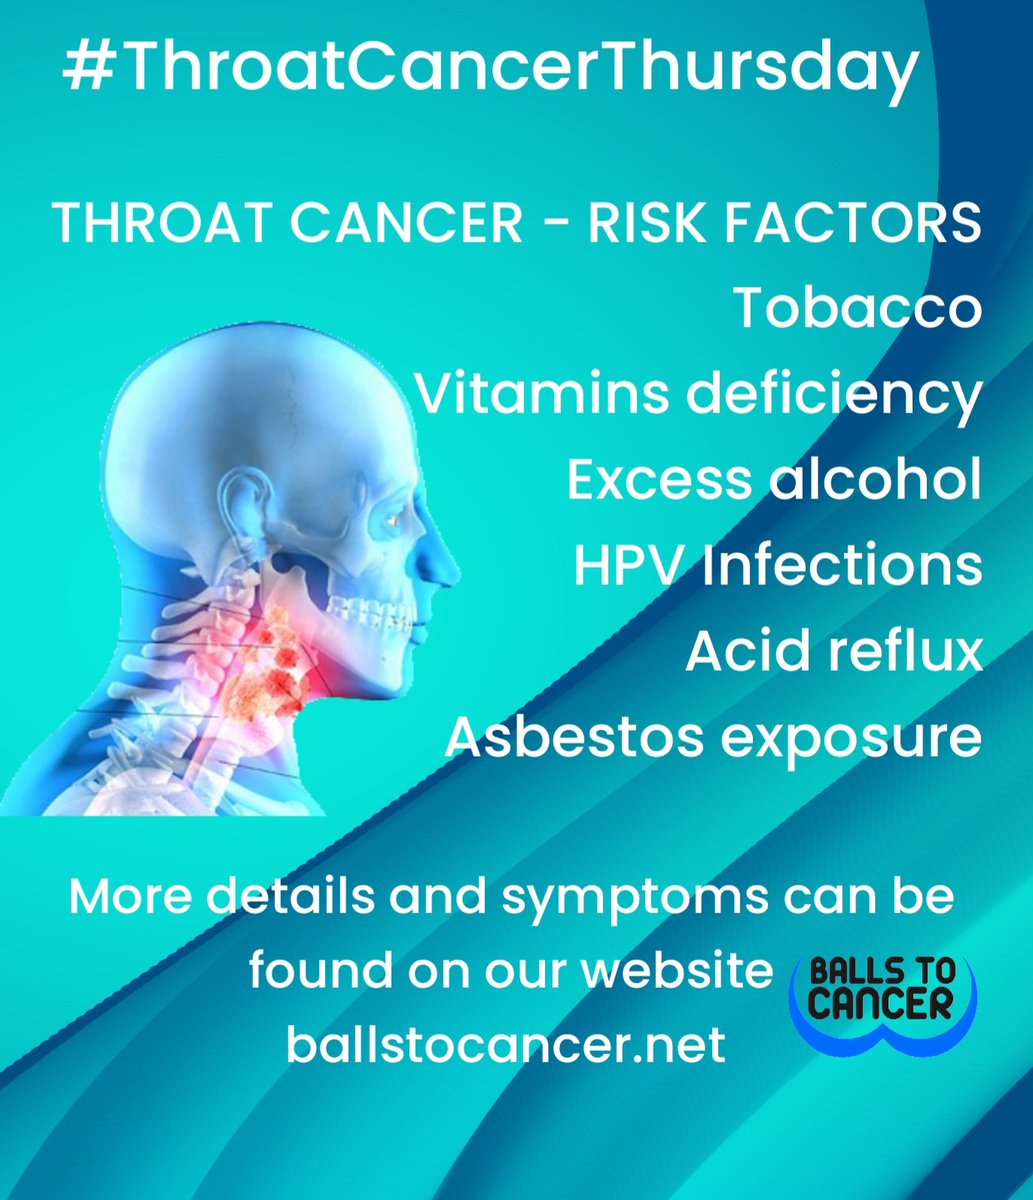 It's #ThroatCancer Thursday. There are around 12,400 new head and neck cancer cases in the UK every year, that's 34 every day.
Head and neck cancer is the 8th most common cancer in the UK. ballstocancer.net/oral-cancer  #ballstocancer #CancerSupportCharity